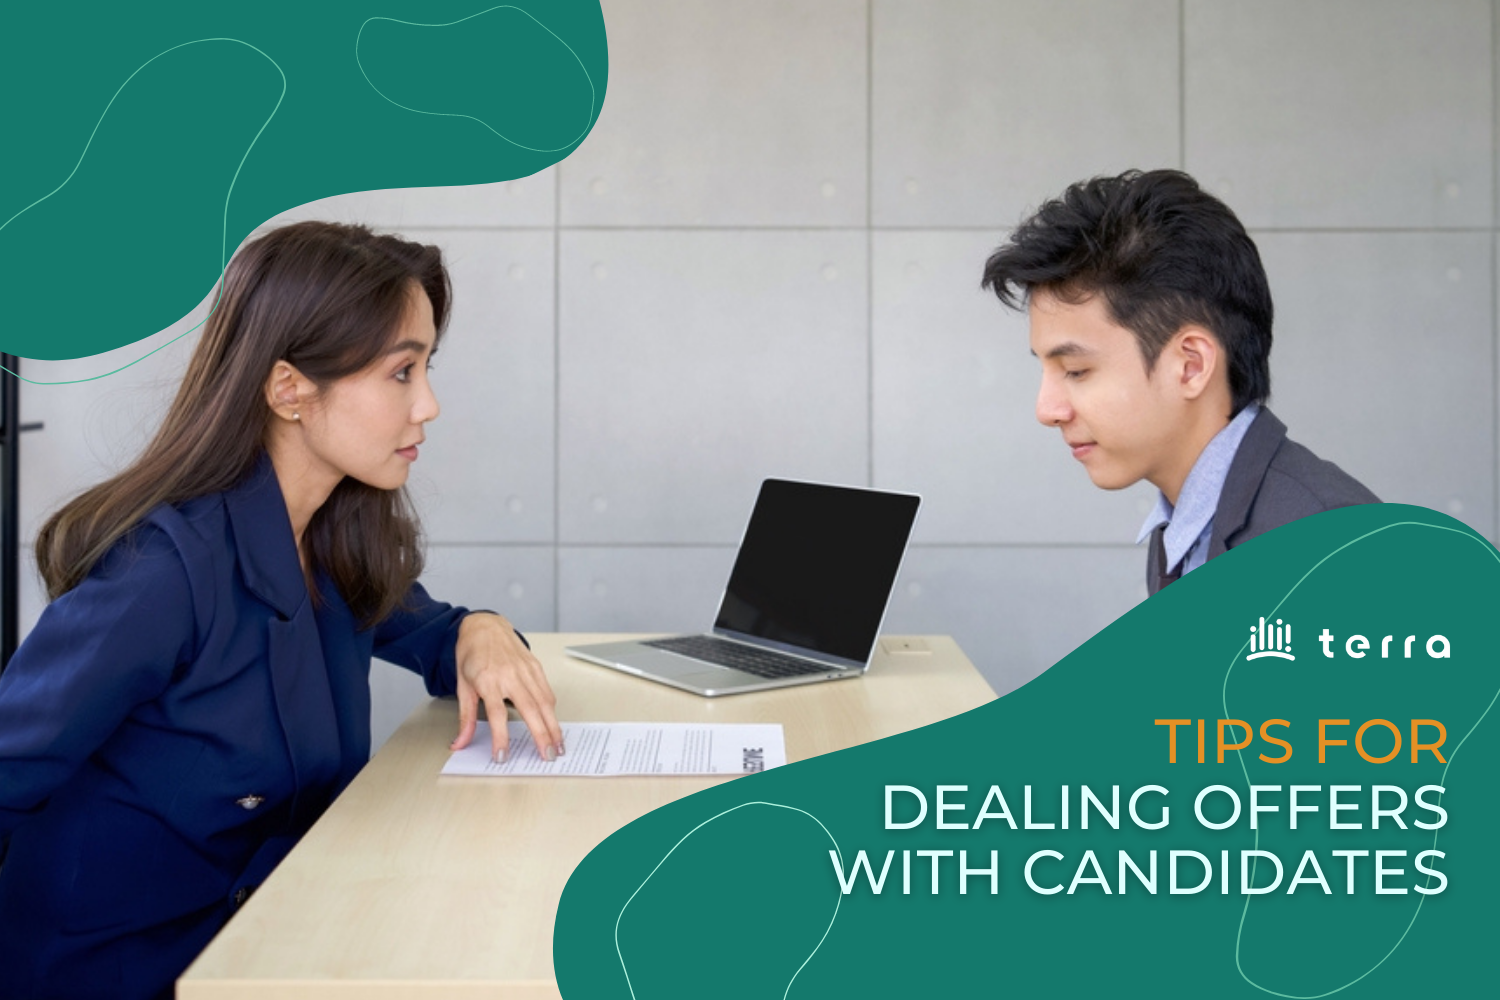 Tips for dealing offers with candidates